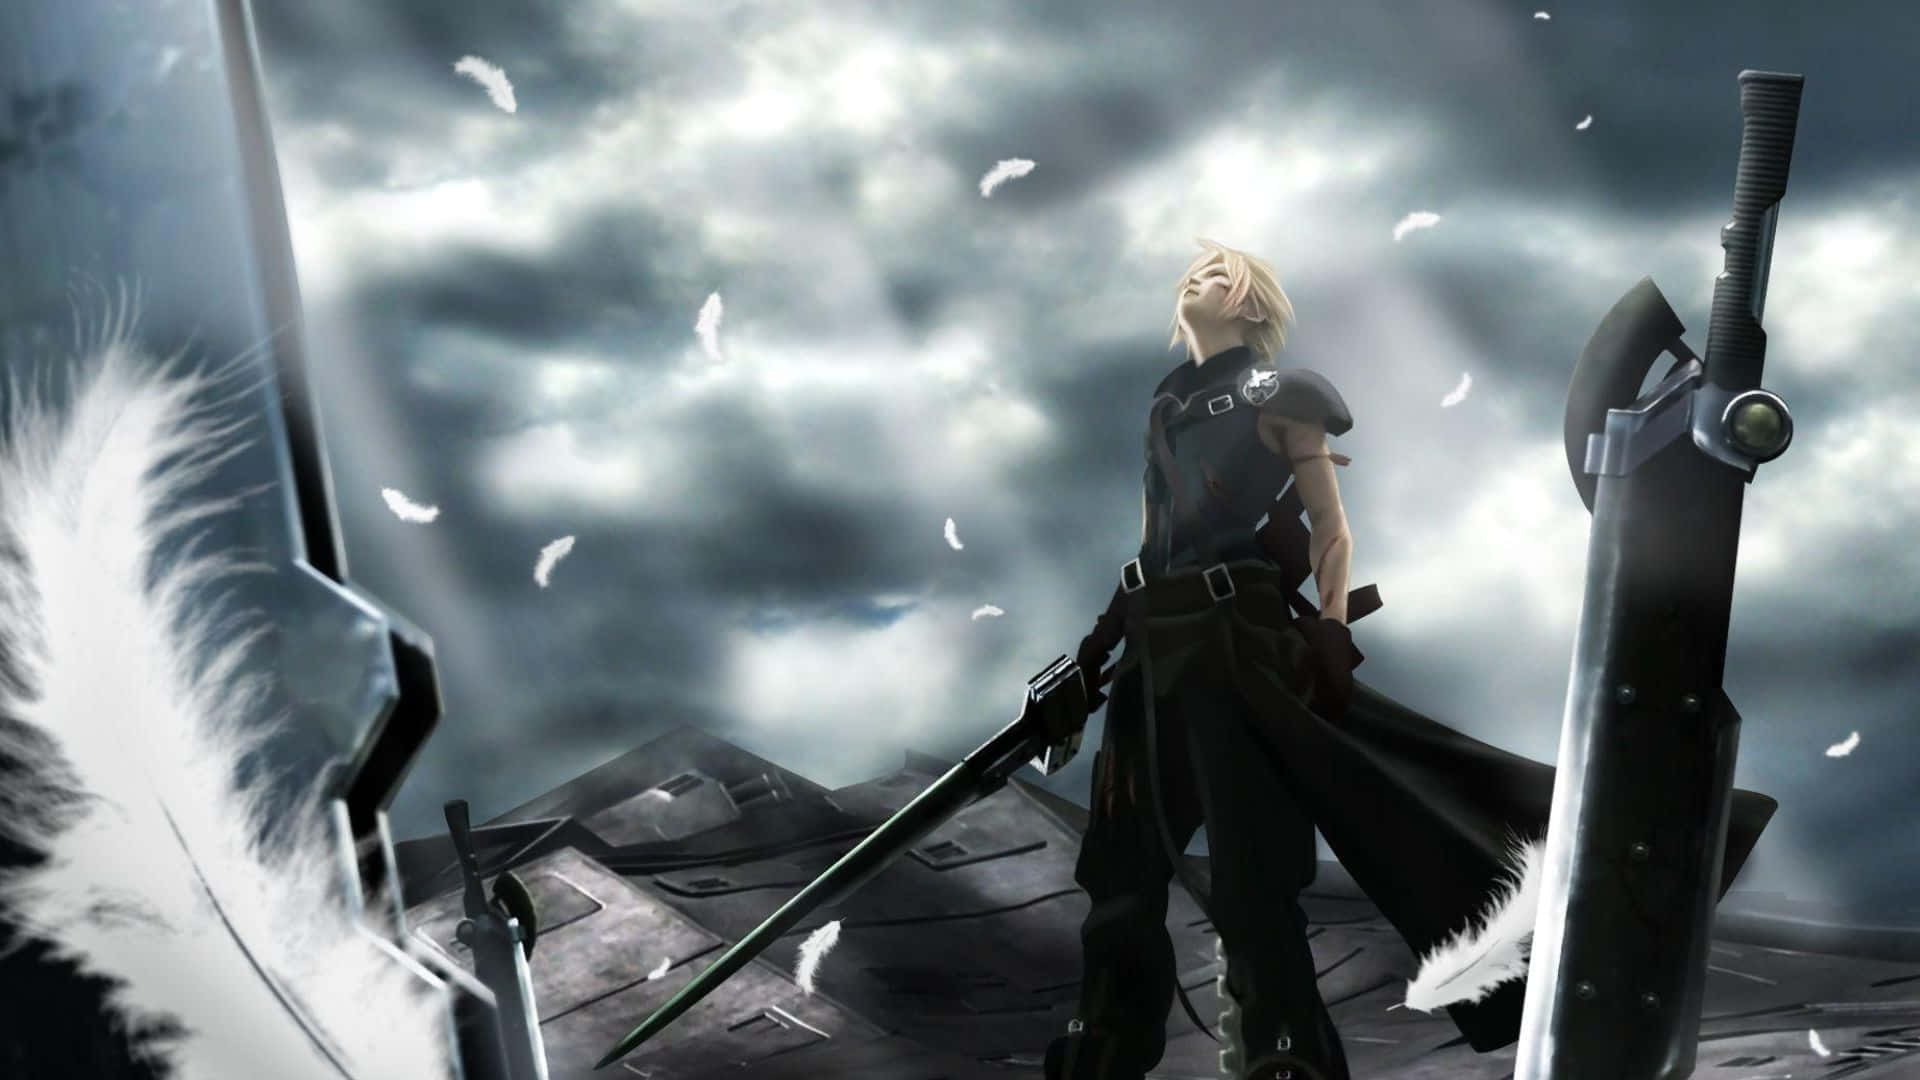 Cloud Strife With Buster Sword Wallpaper